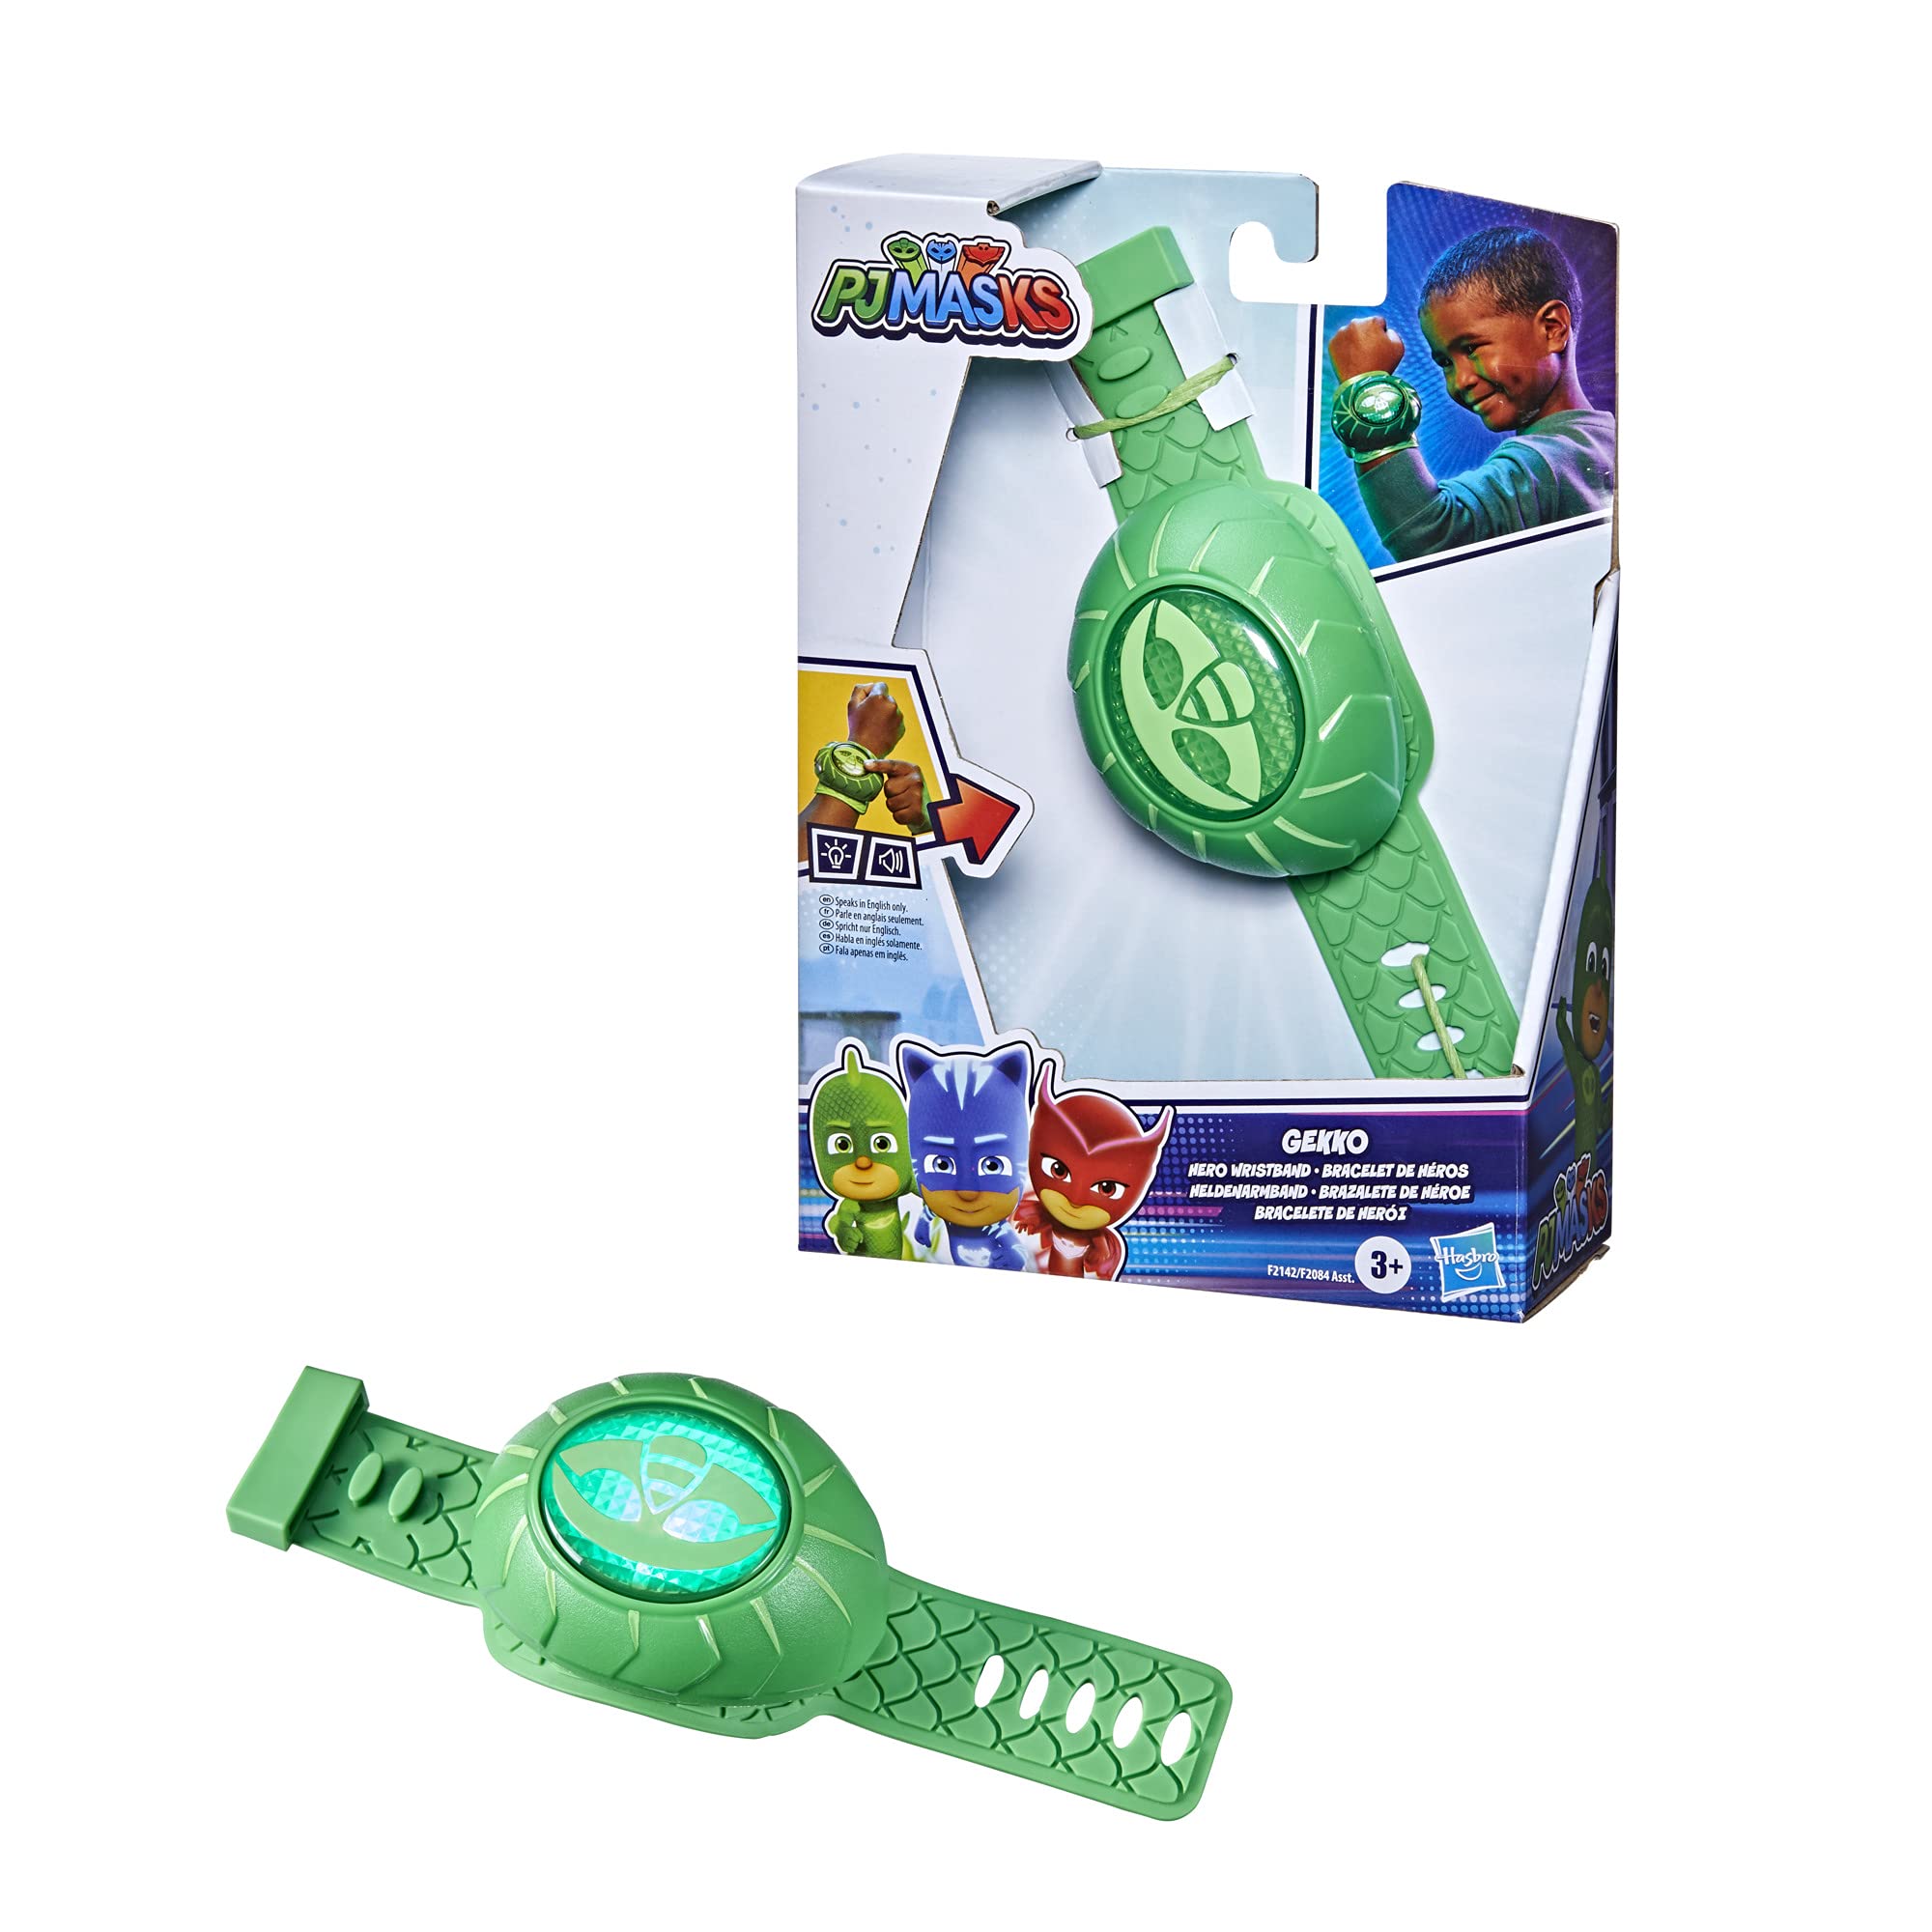 PJ Masks Gekko Power Wristband Preschool Toy, Costume Wearable with Lights and Sounds for Kids Ages 3 and Up